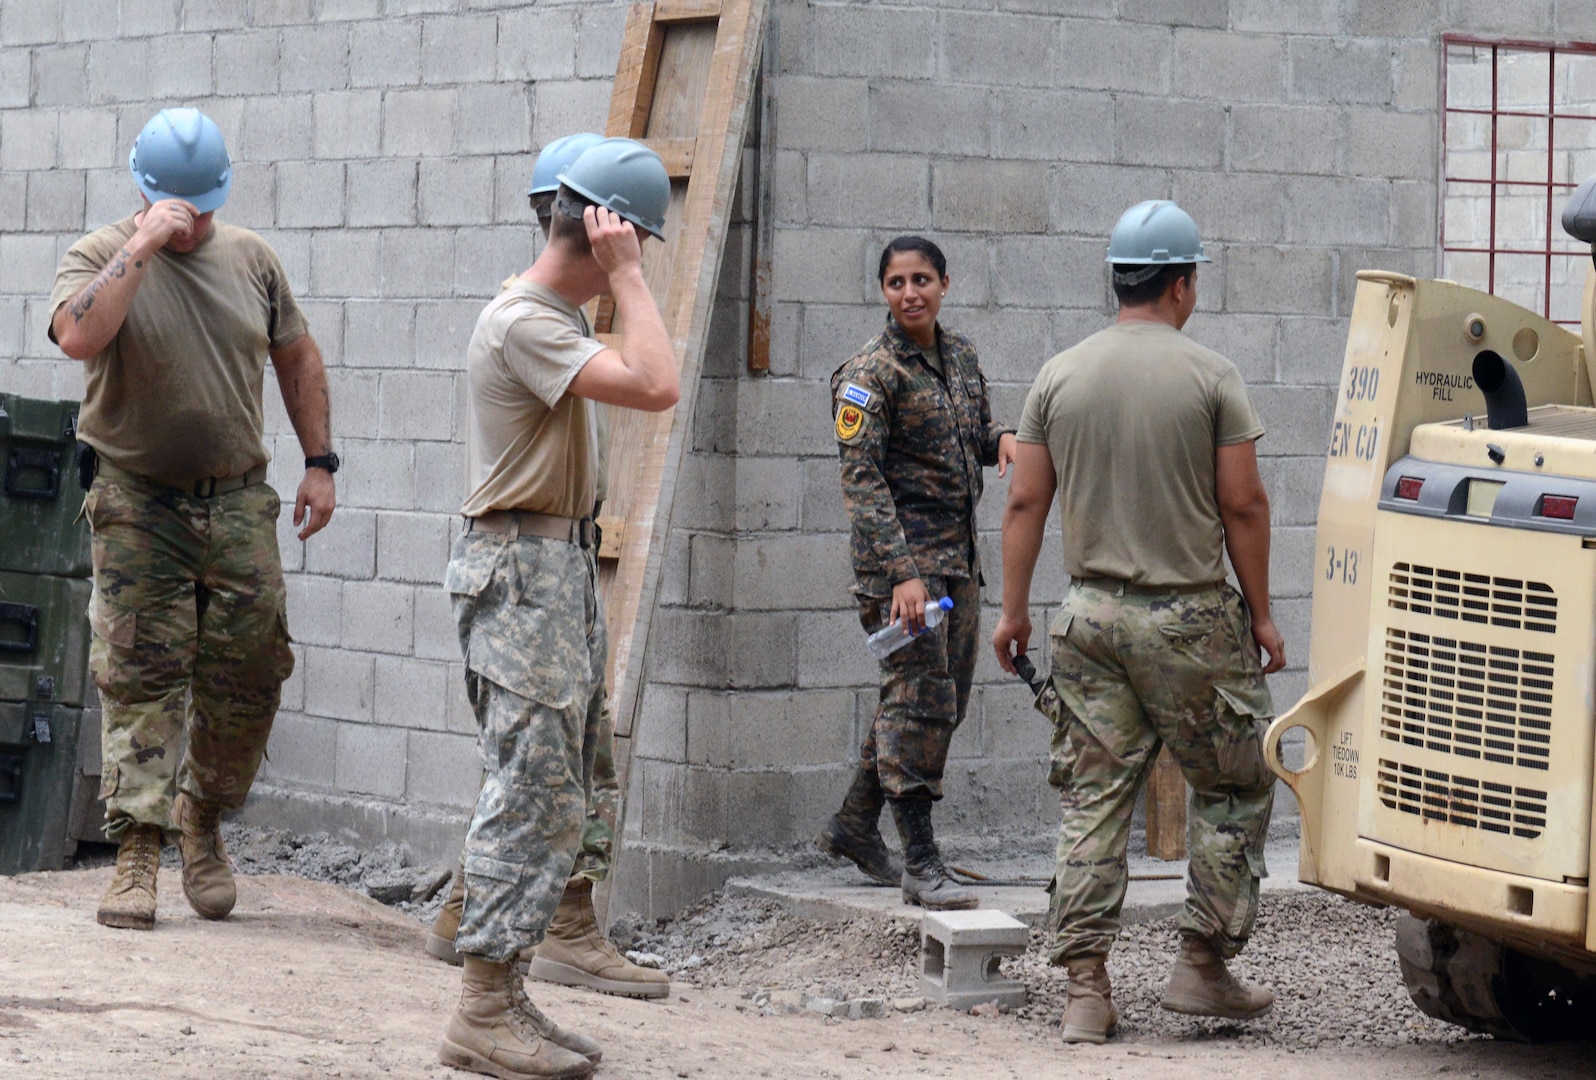 1st Lt. Yamilet Estefani Alabi, a Salvadoran soldier, directs U.S. Soldiers at a construction site in El Amato, June 25, 2018, in La Paz Department, El Salvador. The construction is part of U.S. Army South-led Beyond the Horizon exercise lasting May 12 through Aug. 4, 2018.